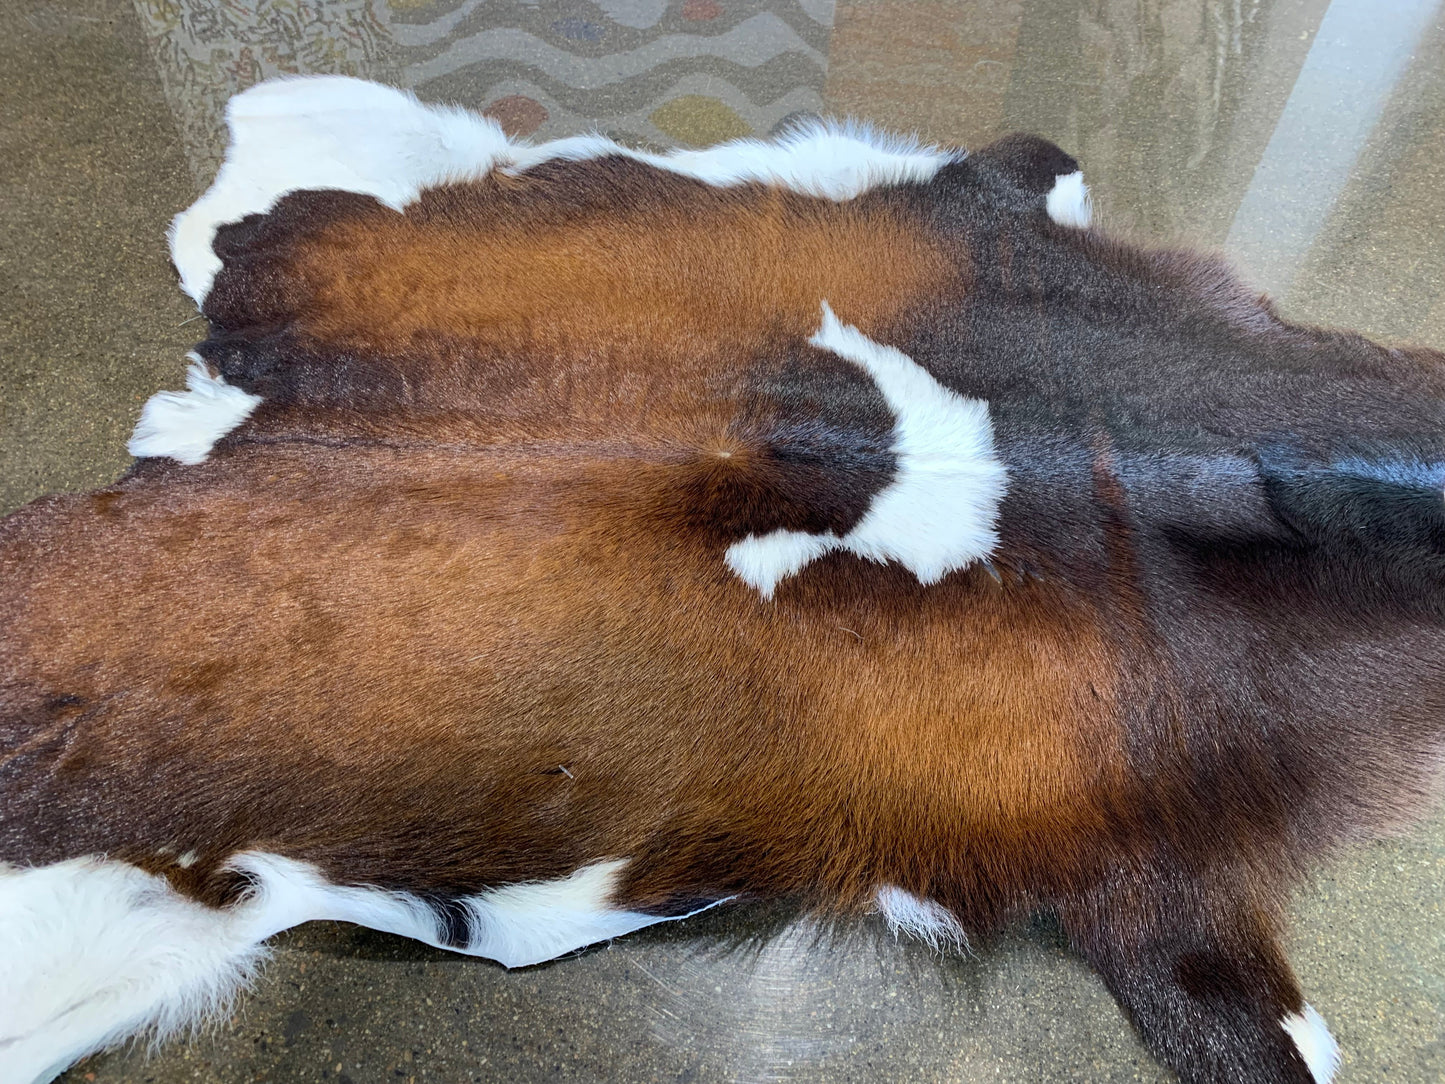 601-4: Cowhide rug - Very small brown and white